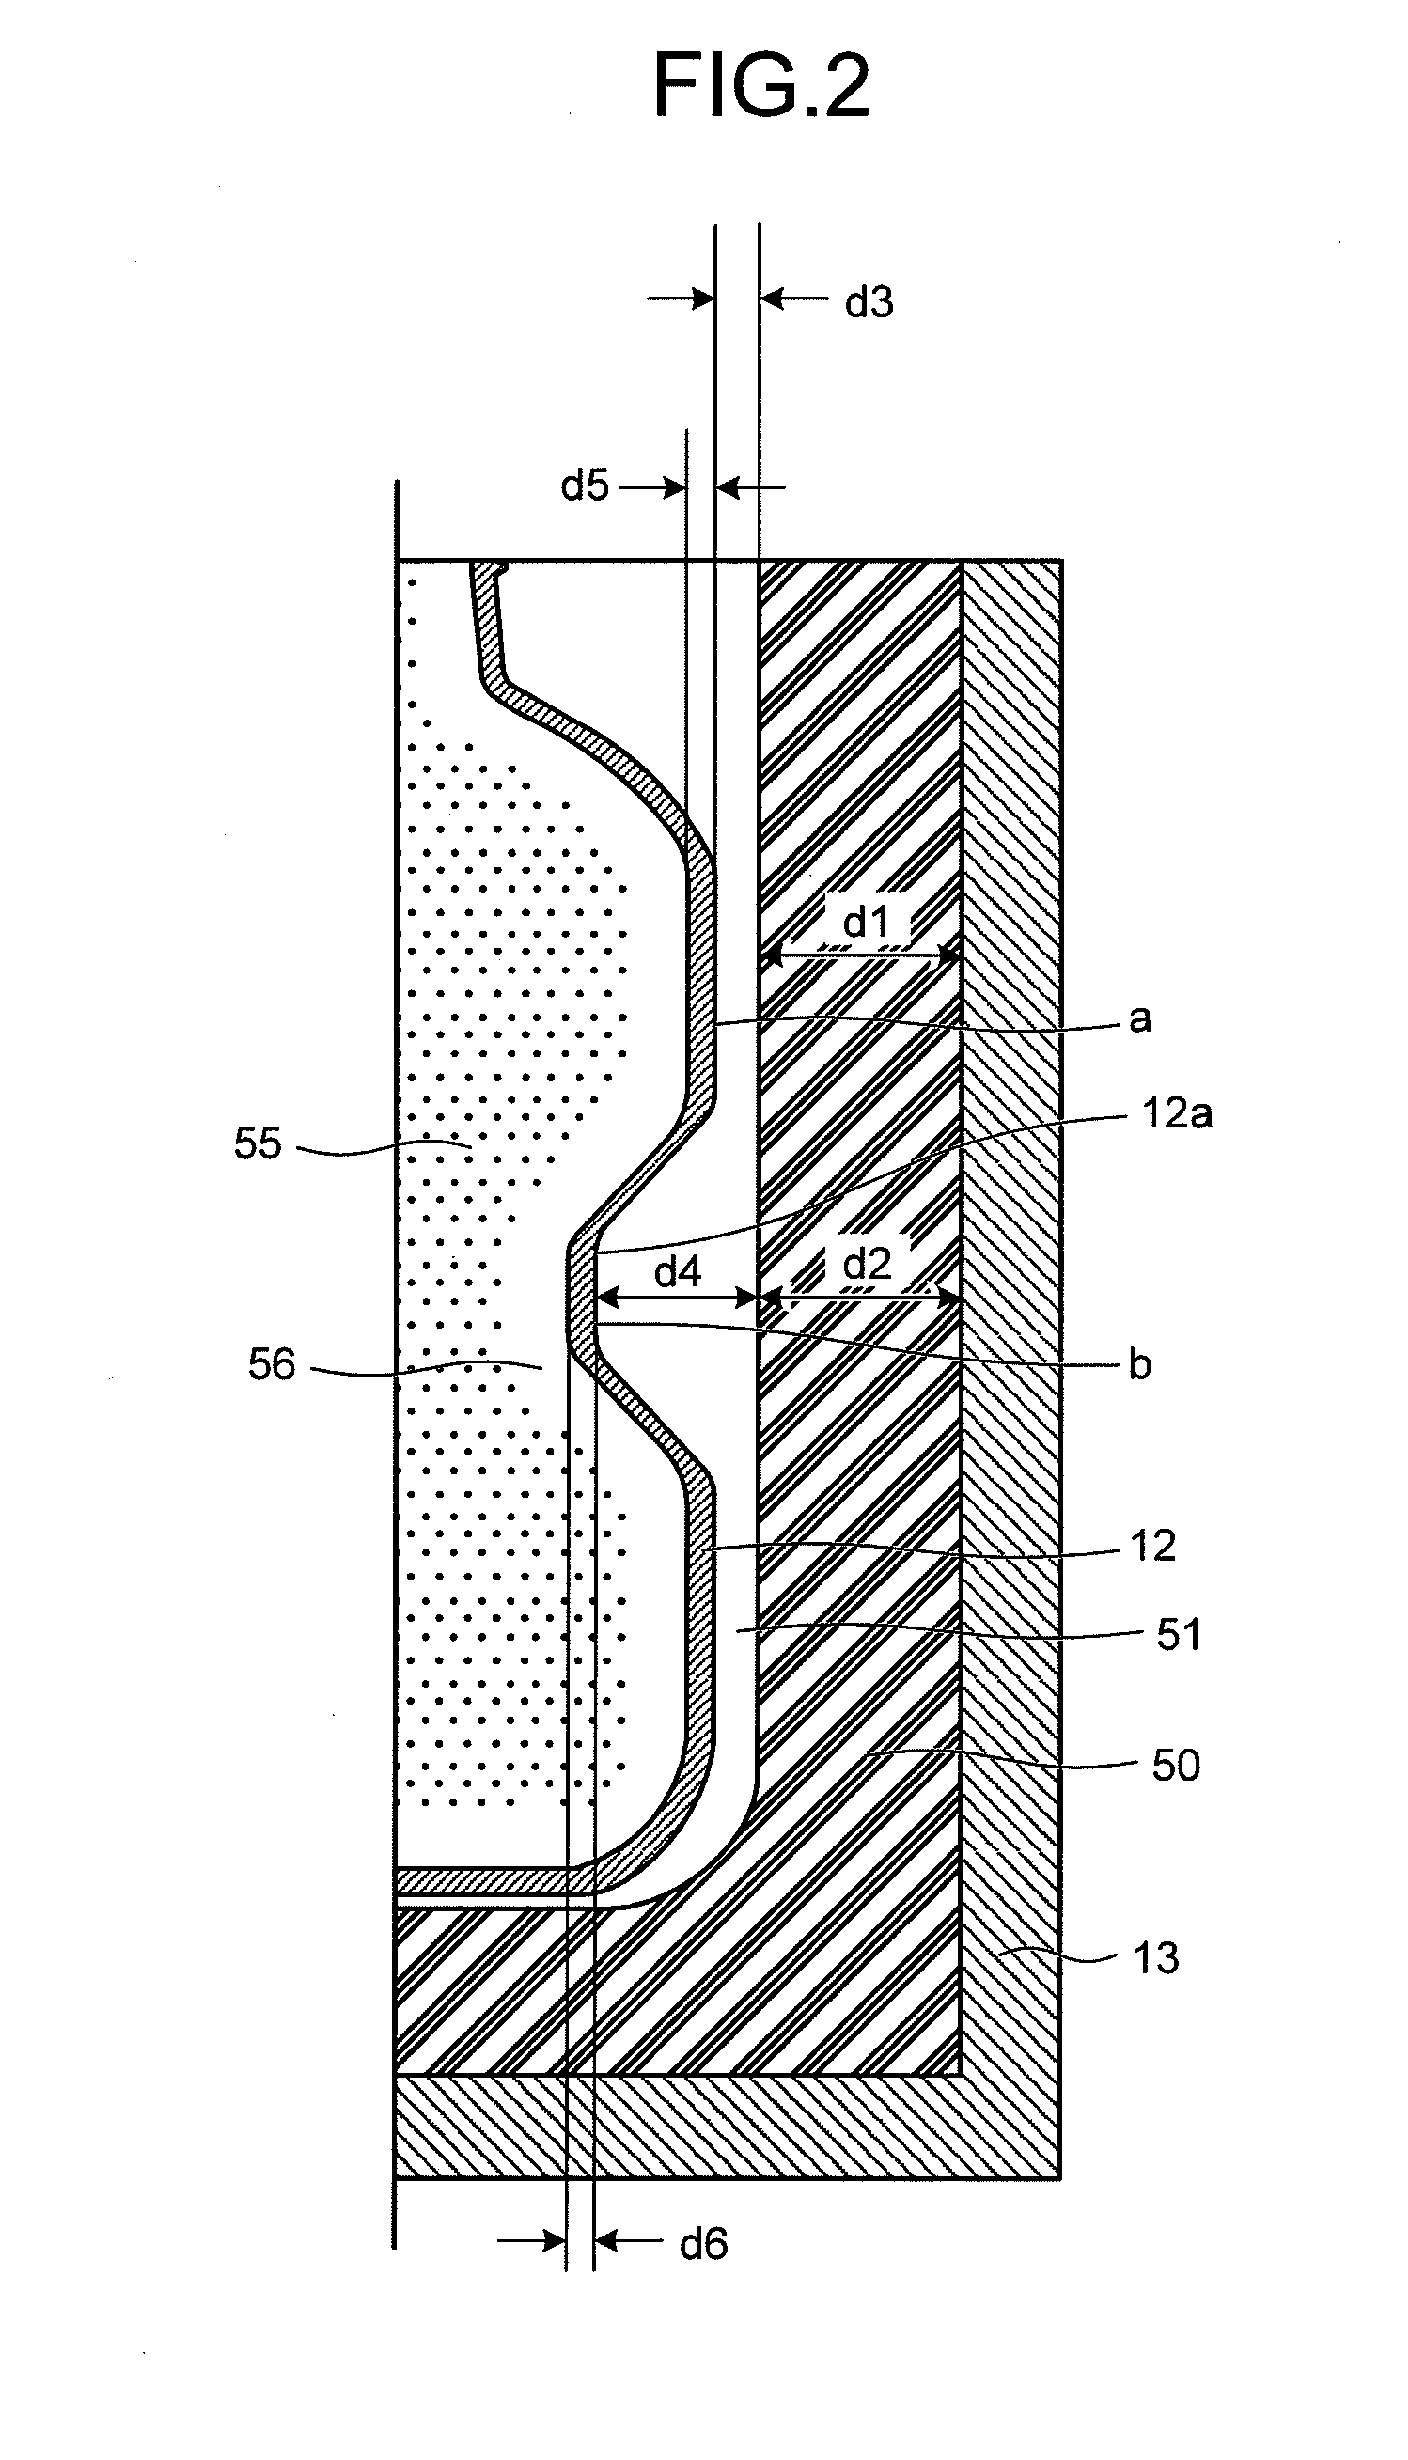 Barrier-film forming apparatus, barrier-film forming method, and barrier-film coated container